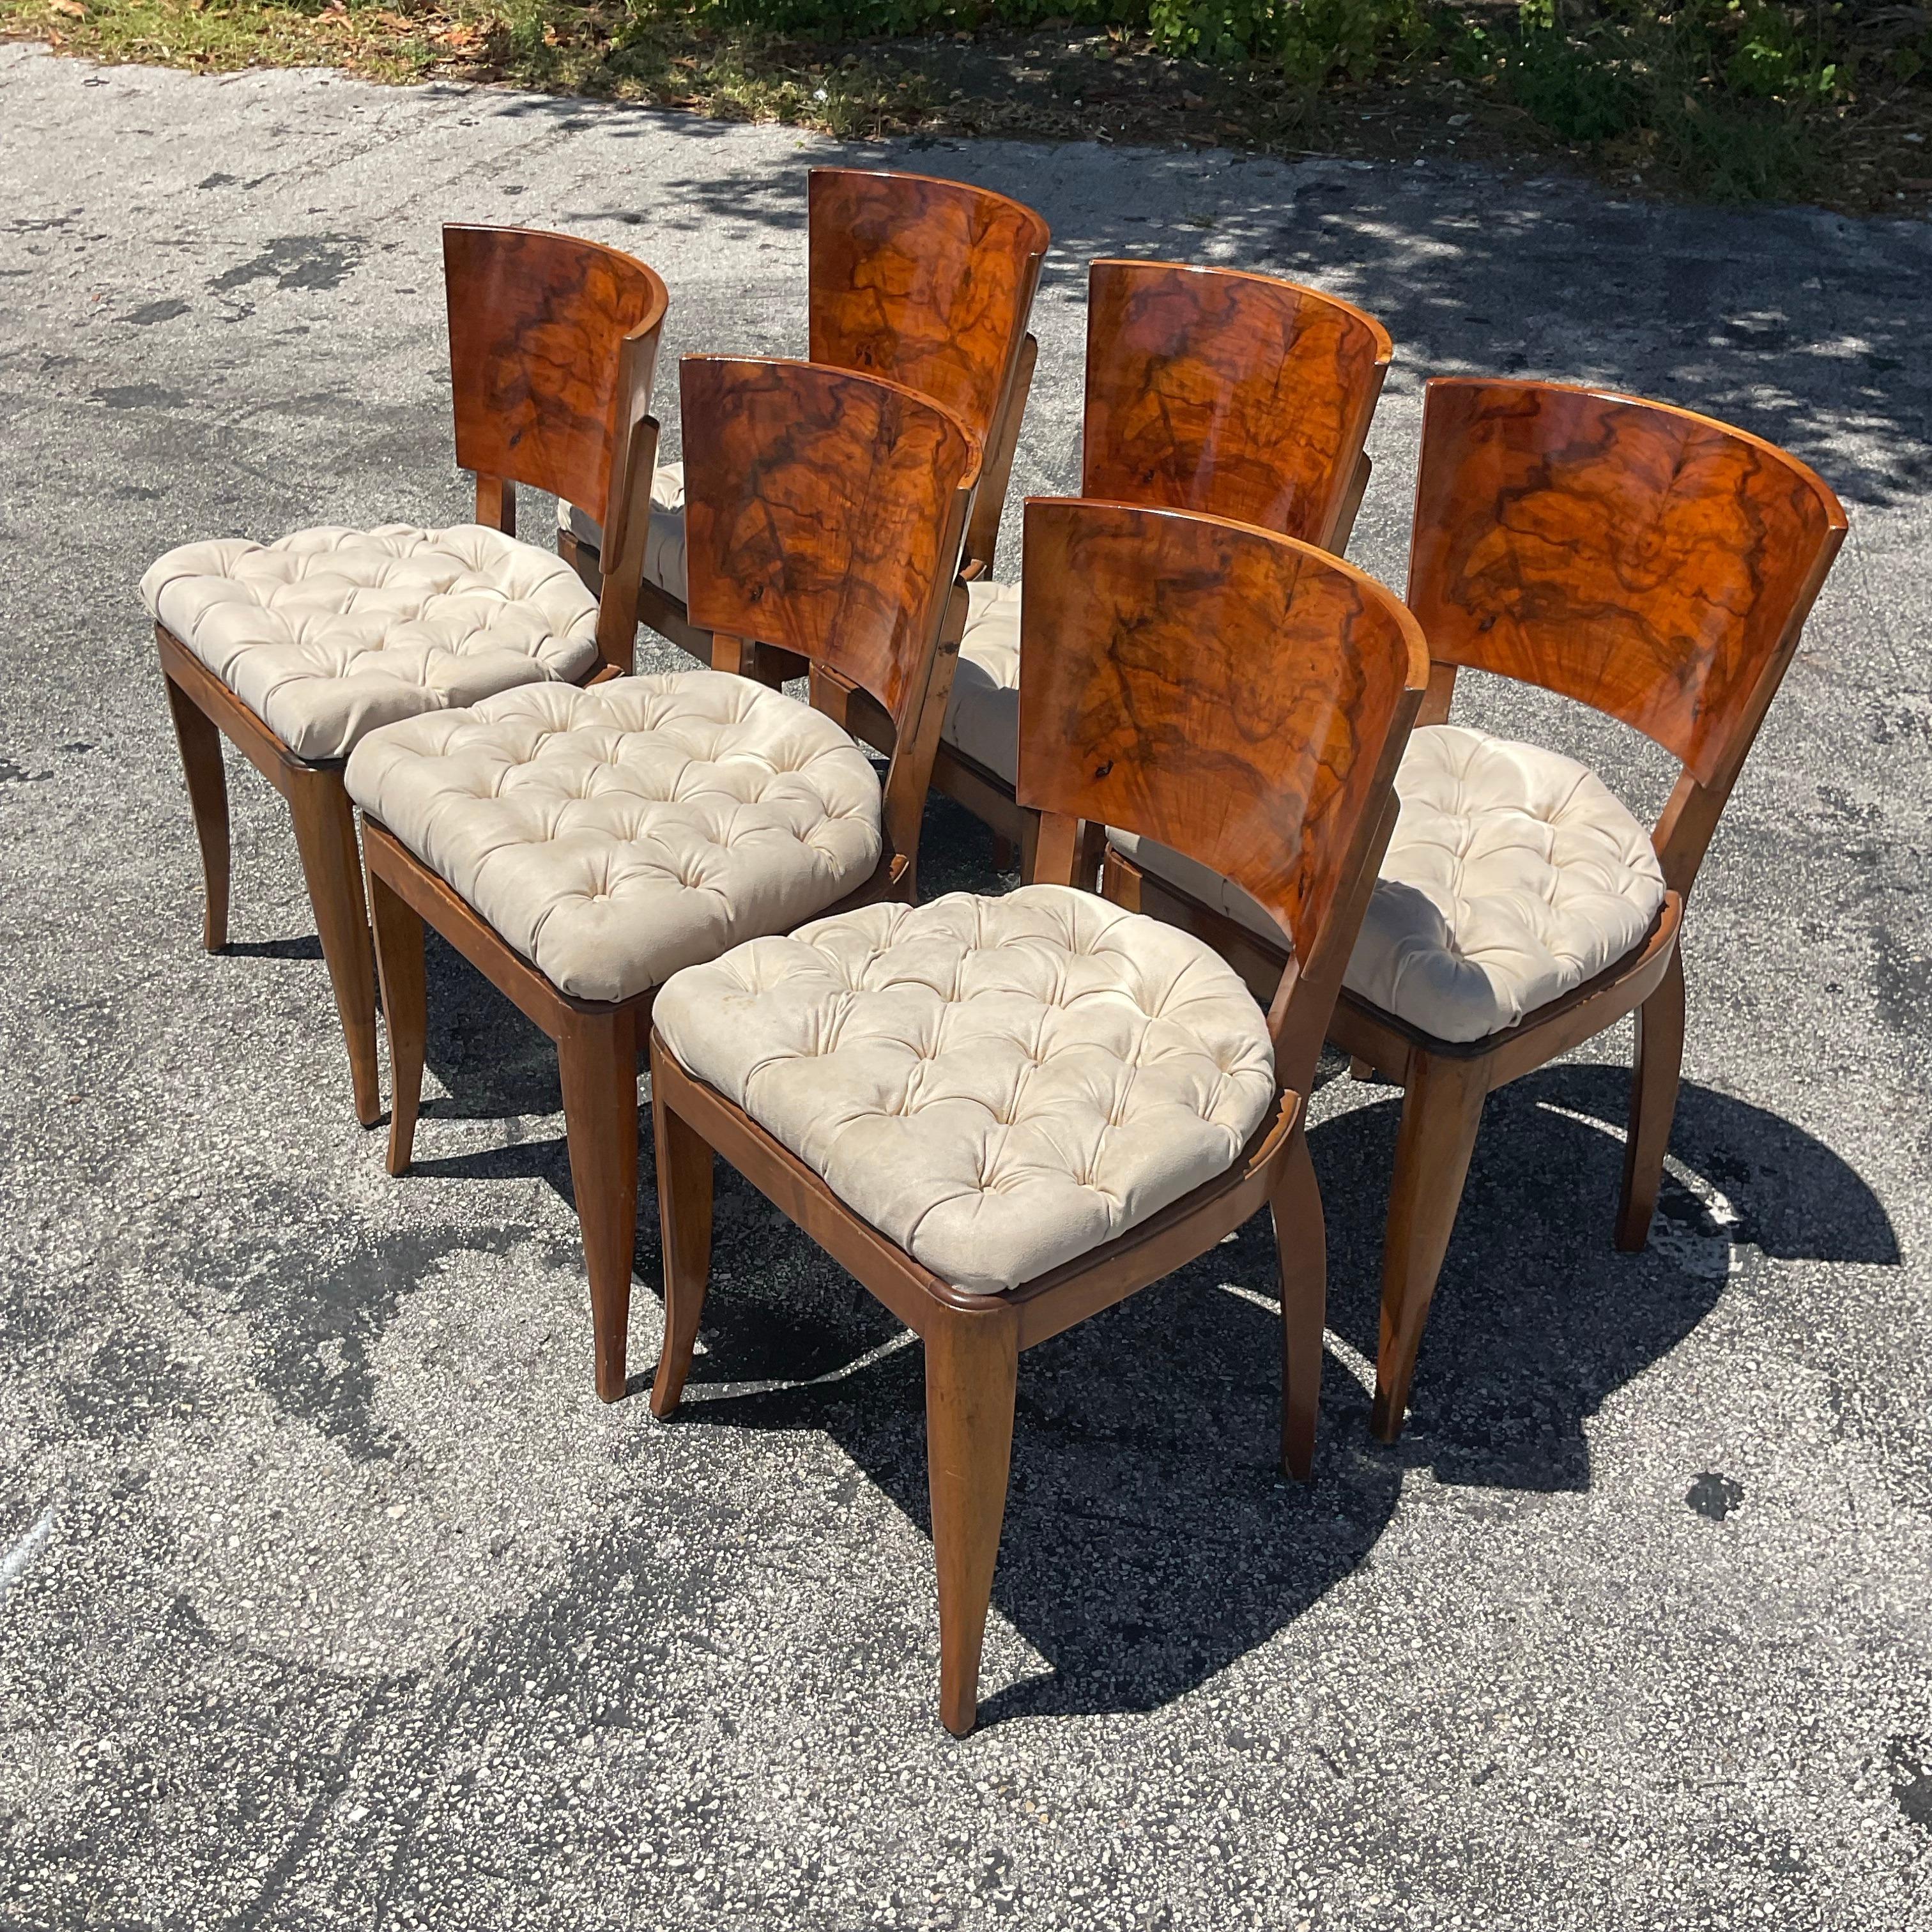 Vintage Deco Burl Wood Dining Chairs - Set of 6 5